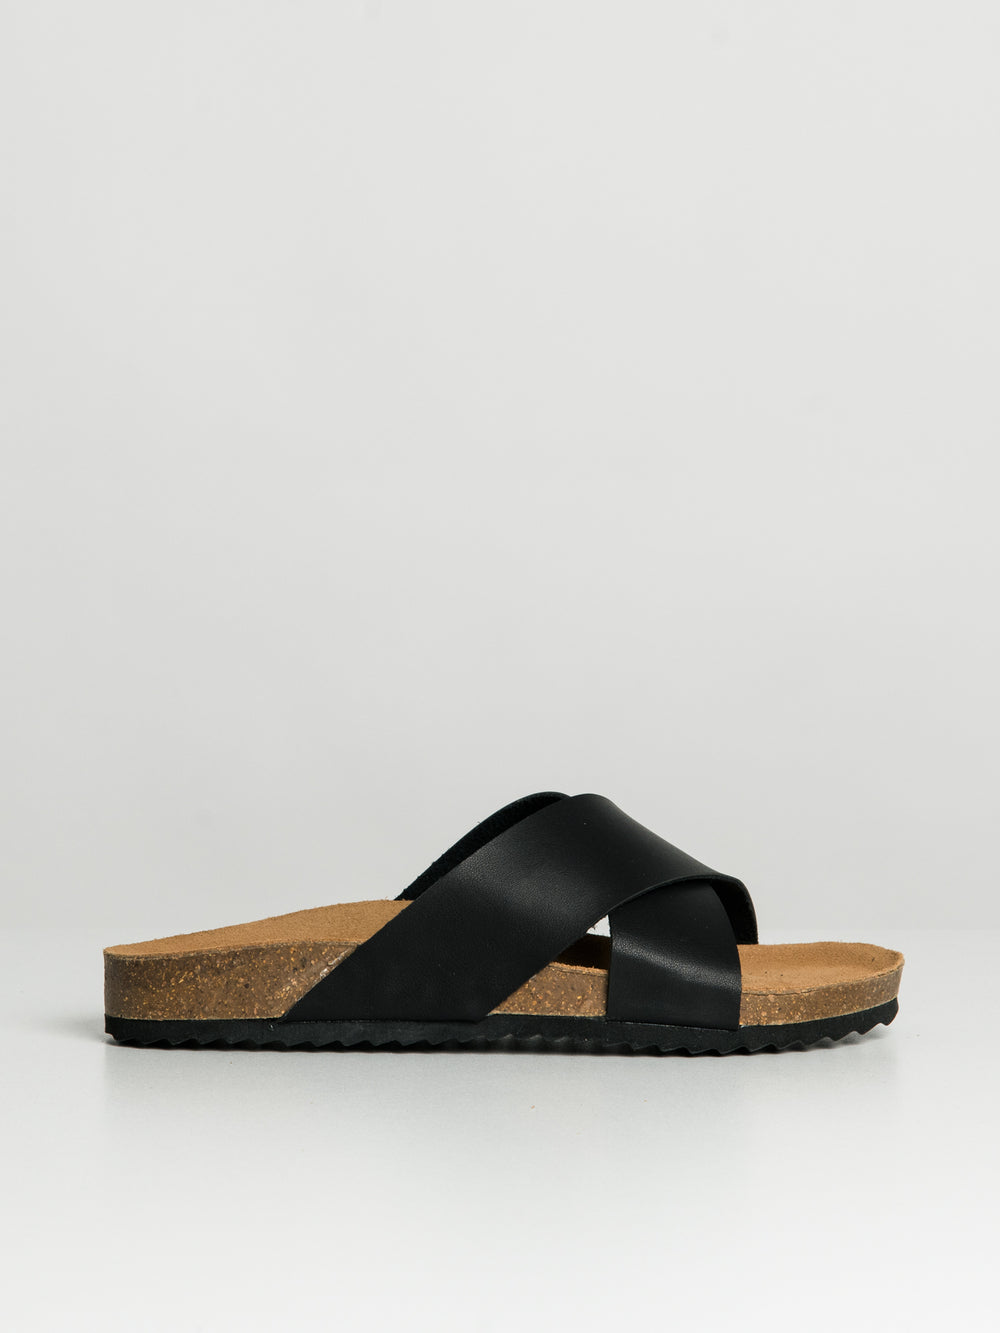 WOMENS HARLOW ECLIPSE VEGAN SANDALS - CLEARANCE